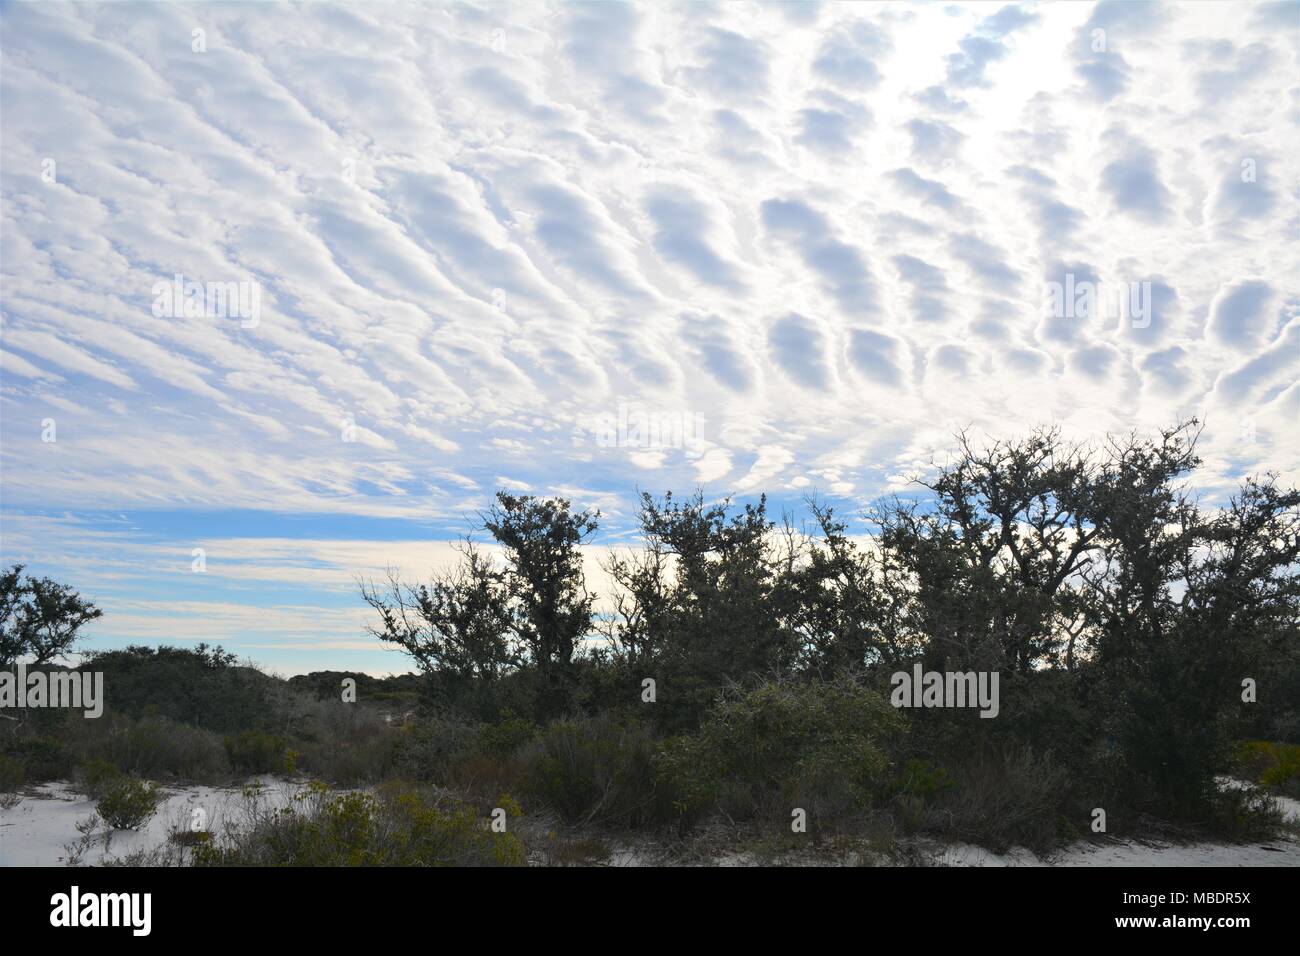 Unique cloud formation just before sunset on the beaches of Gulf Shore, Alabama Stock Photo